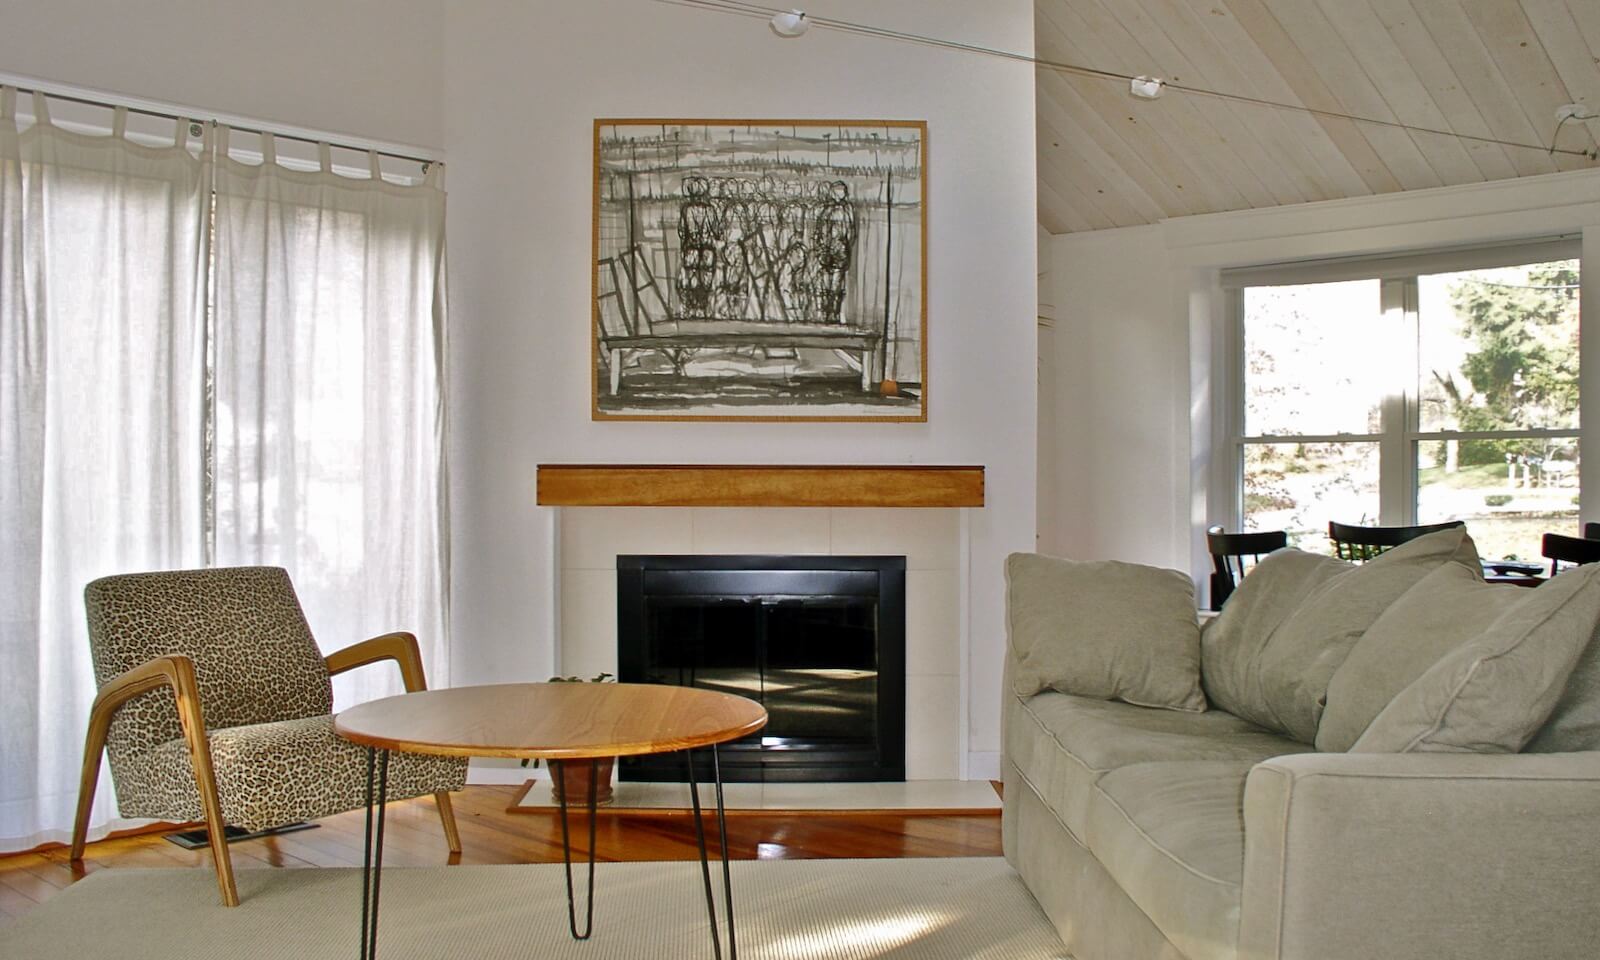 Modern interior with vaulted ceiling in Duxbury MA house by south shore architect + builder.